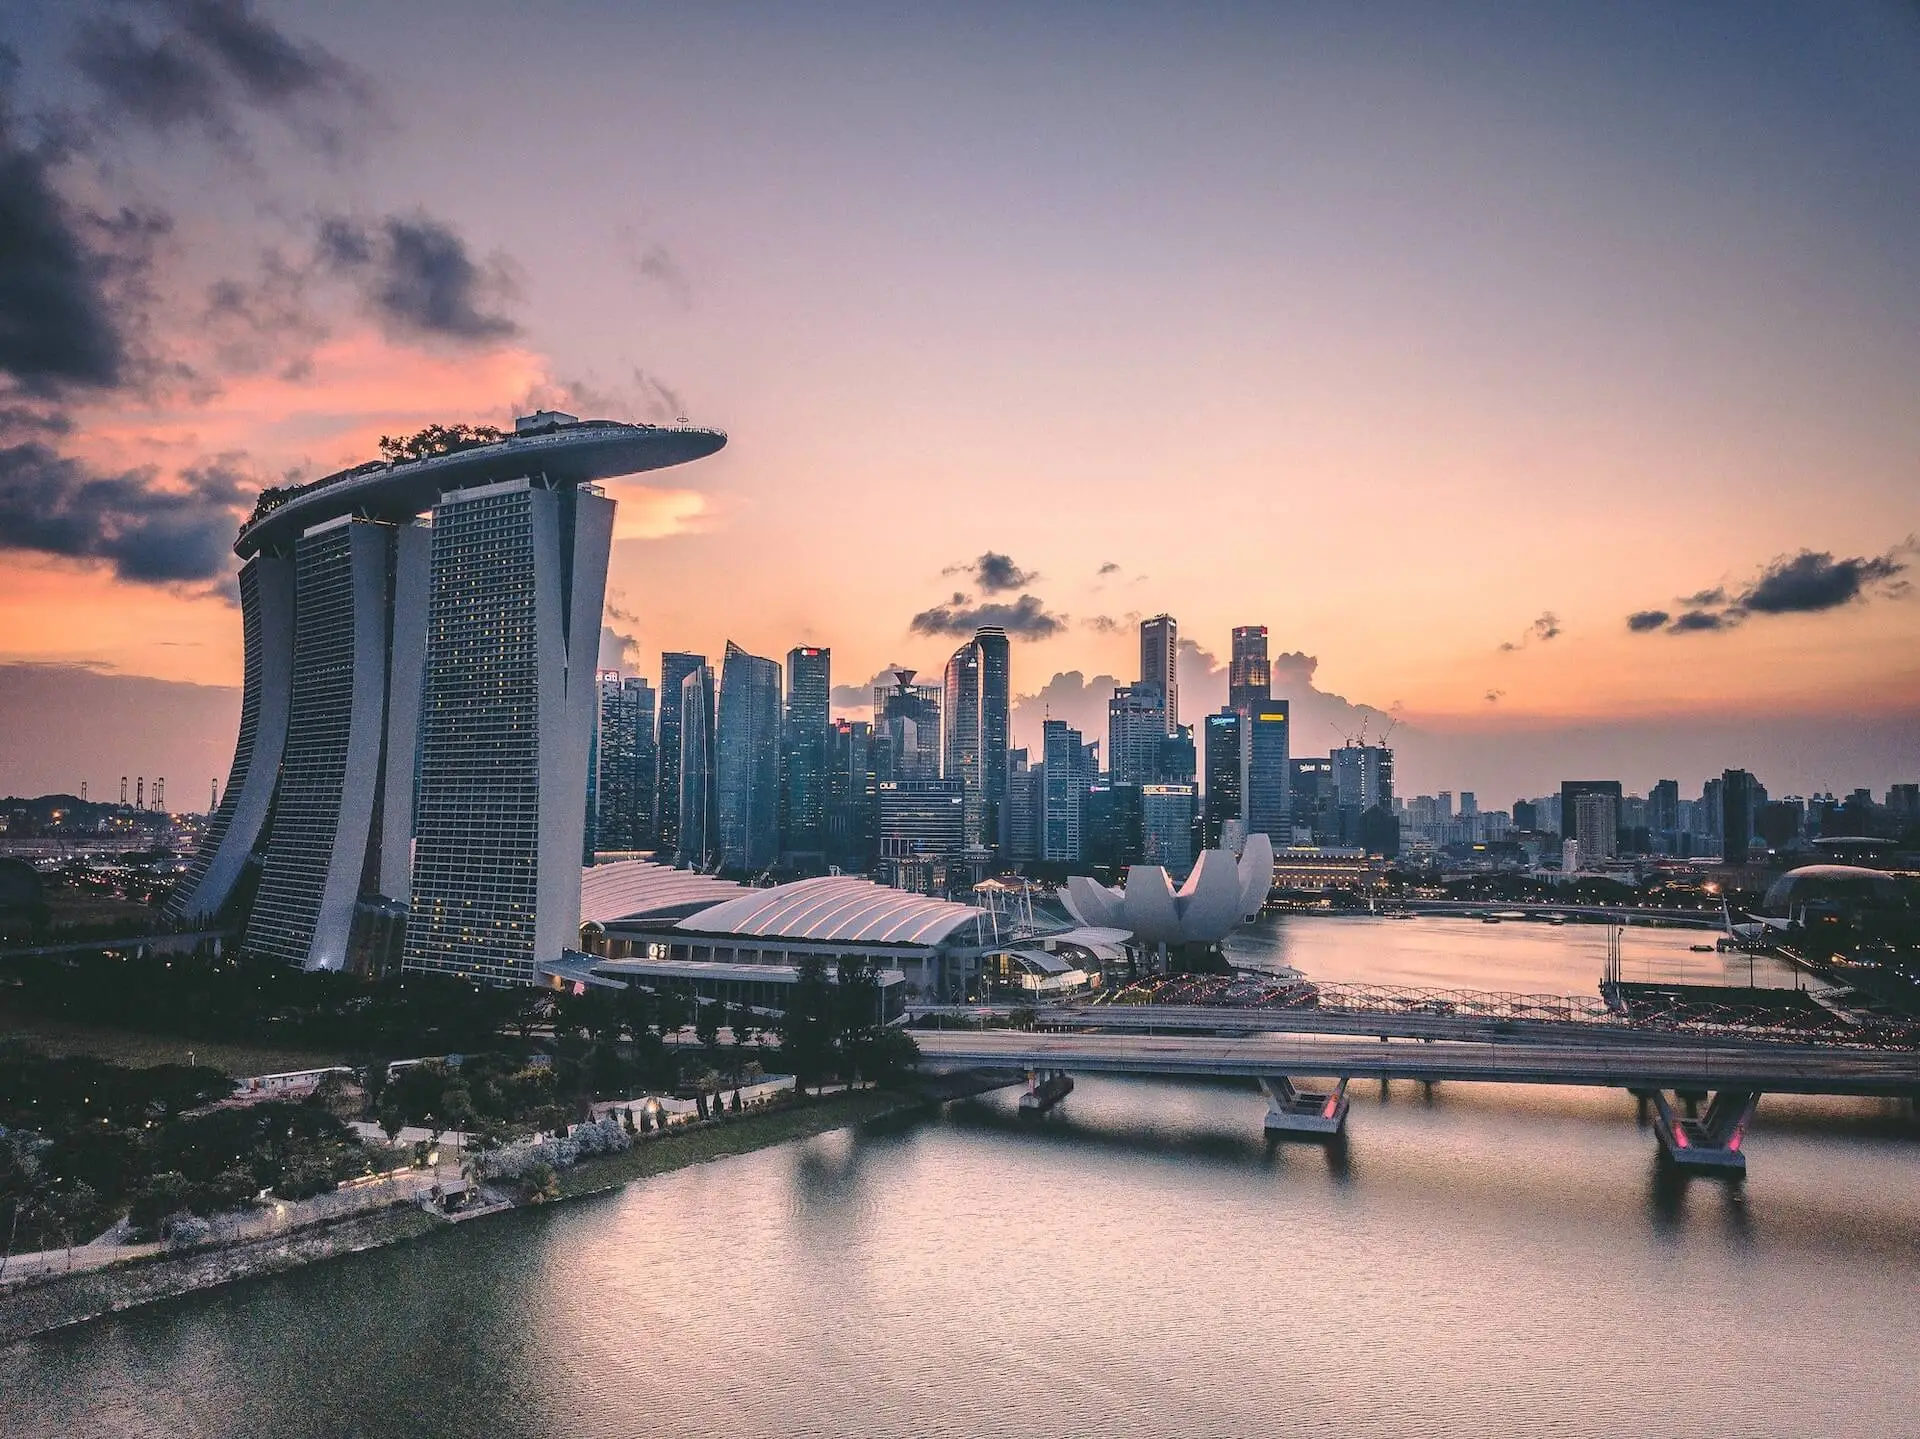 Singapore Has Been Ranked As the Top Country with the Fastest Internet Speed for Consecutive Years